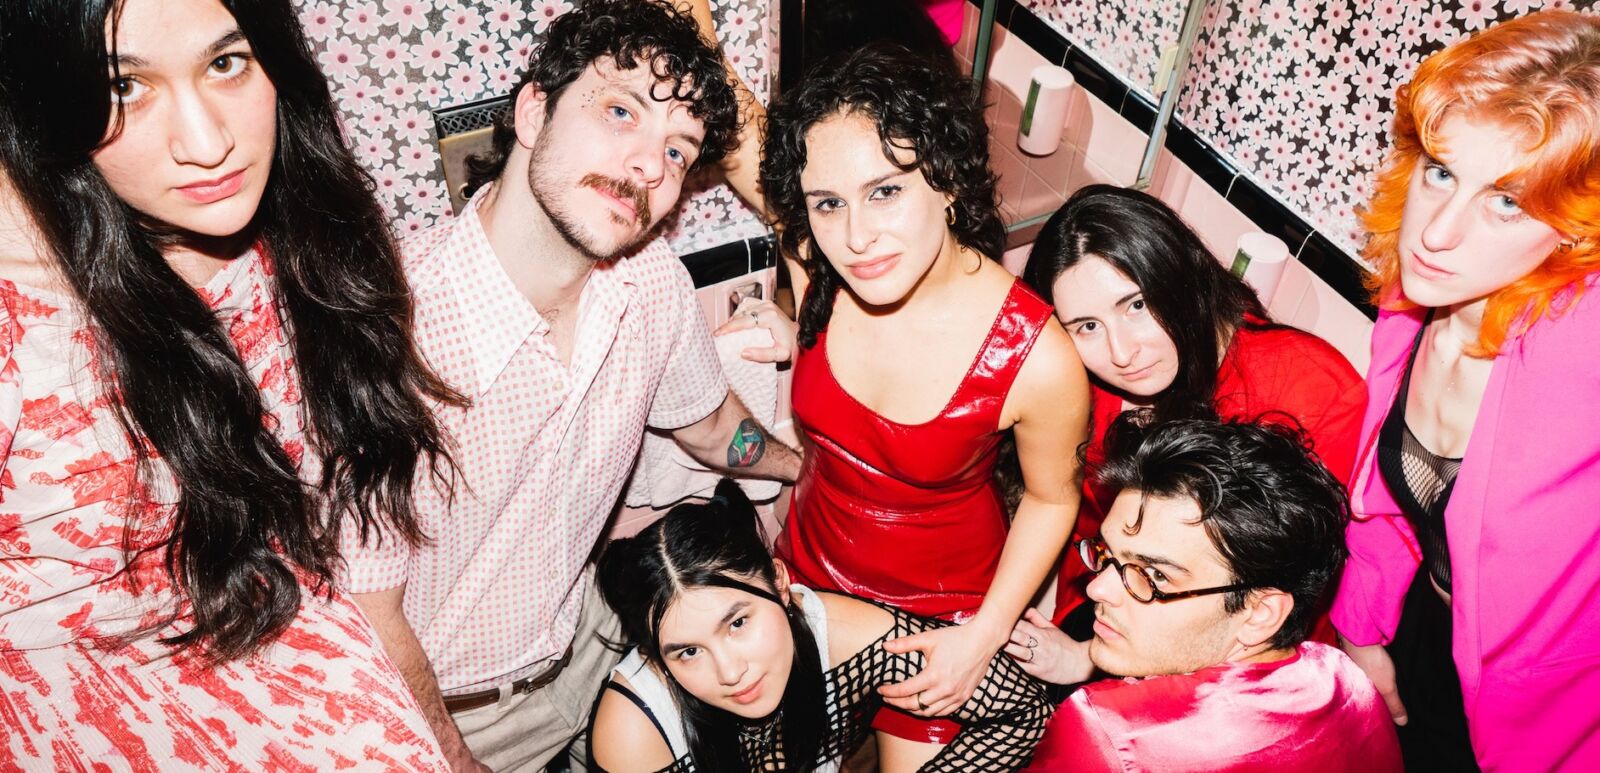 On the Brink? The New Wave of NYC Rock